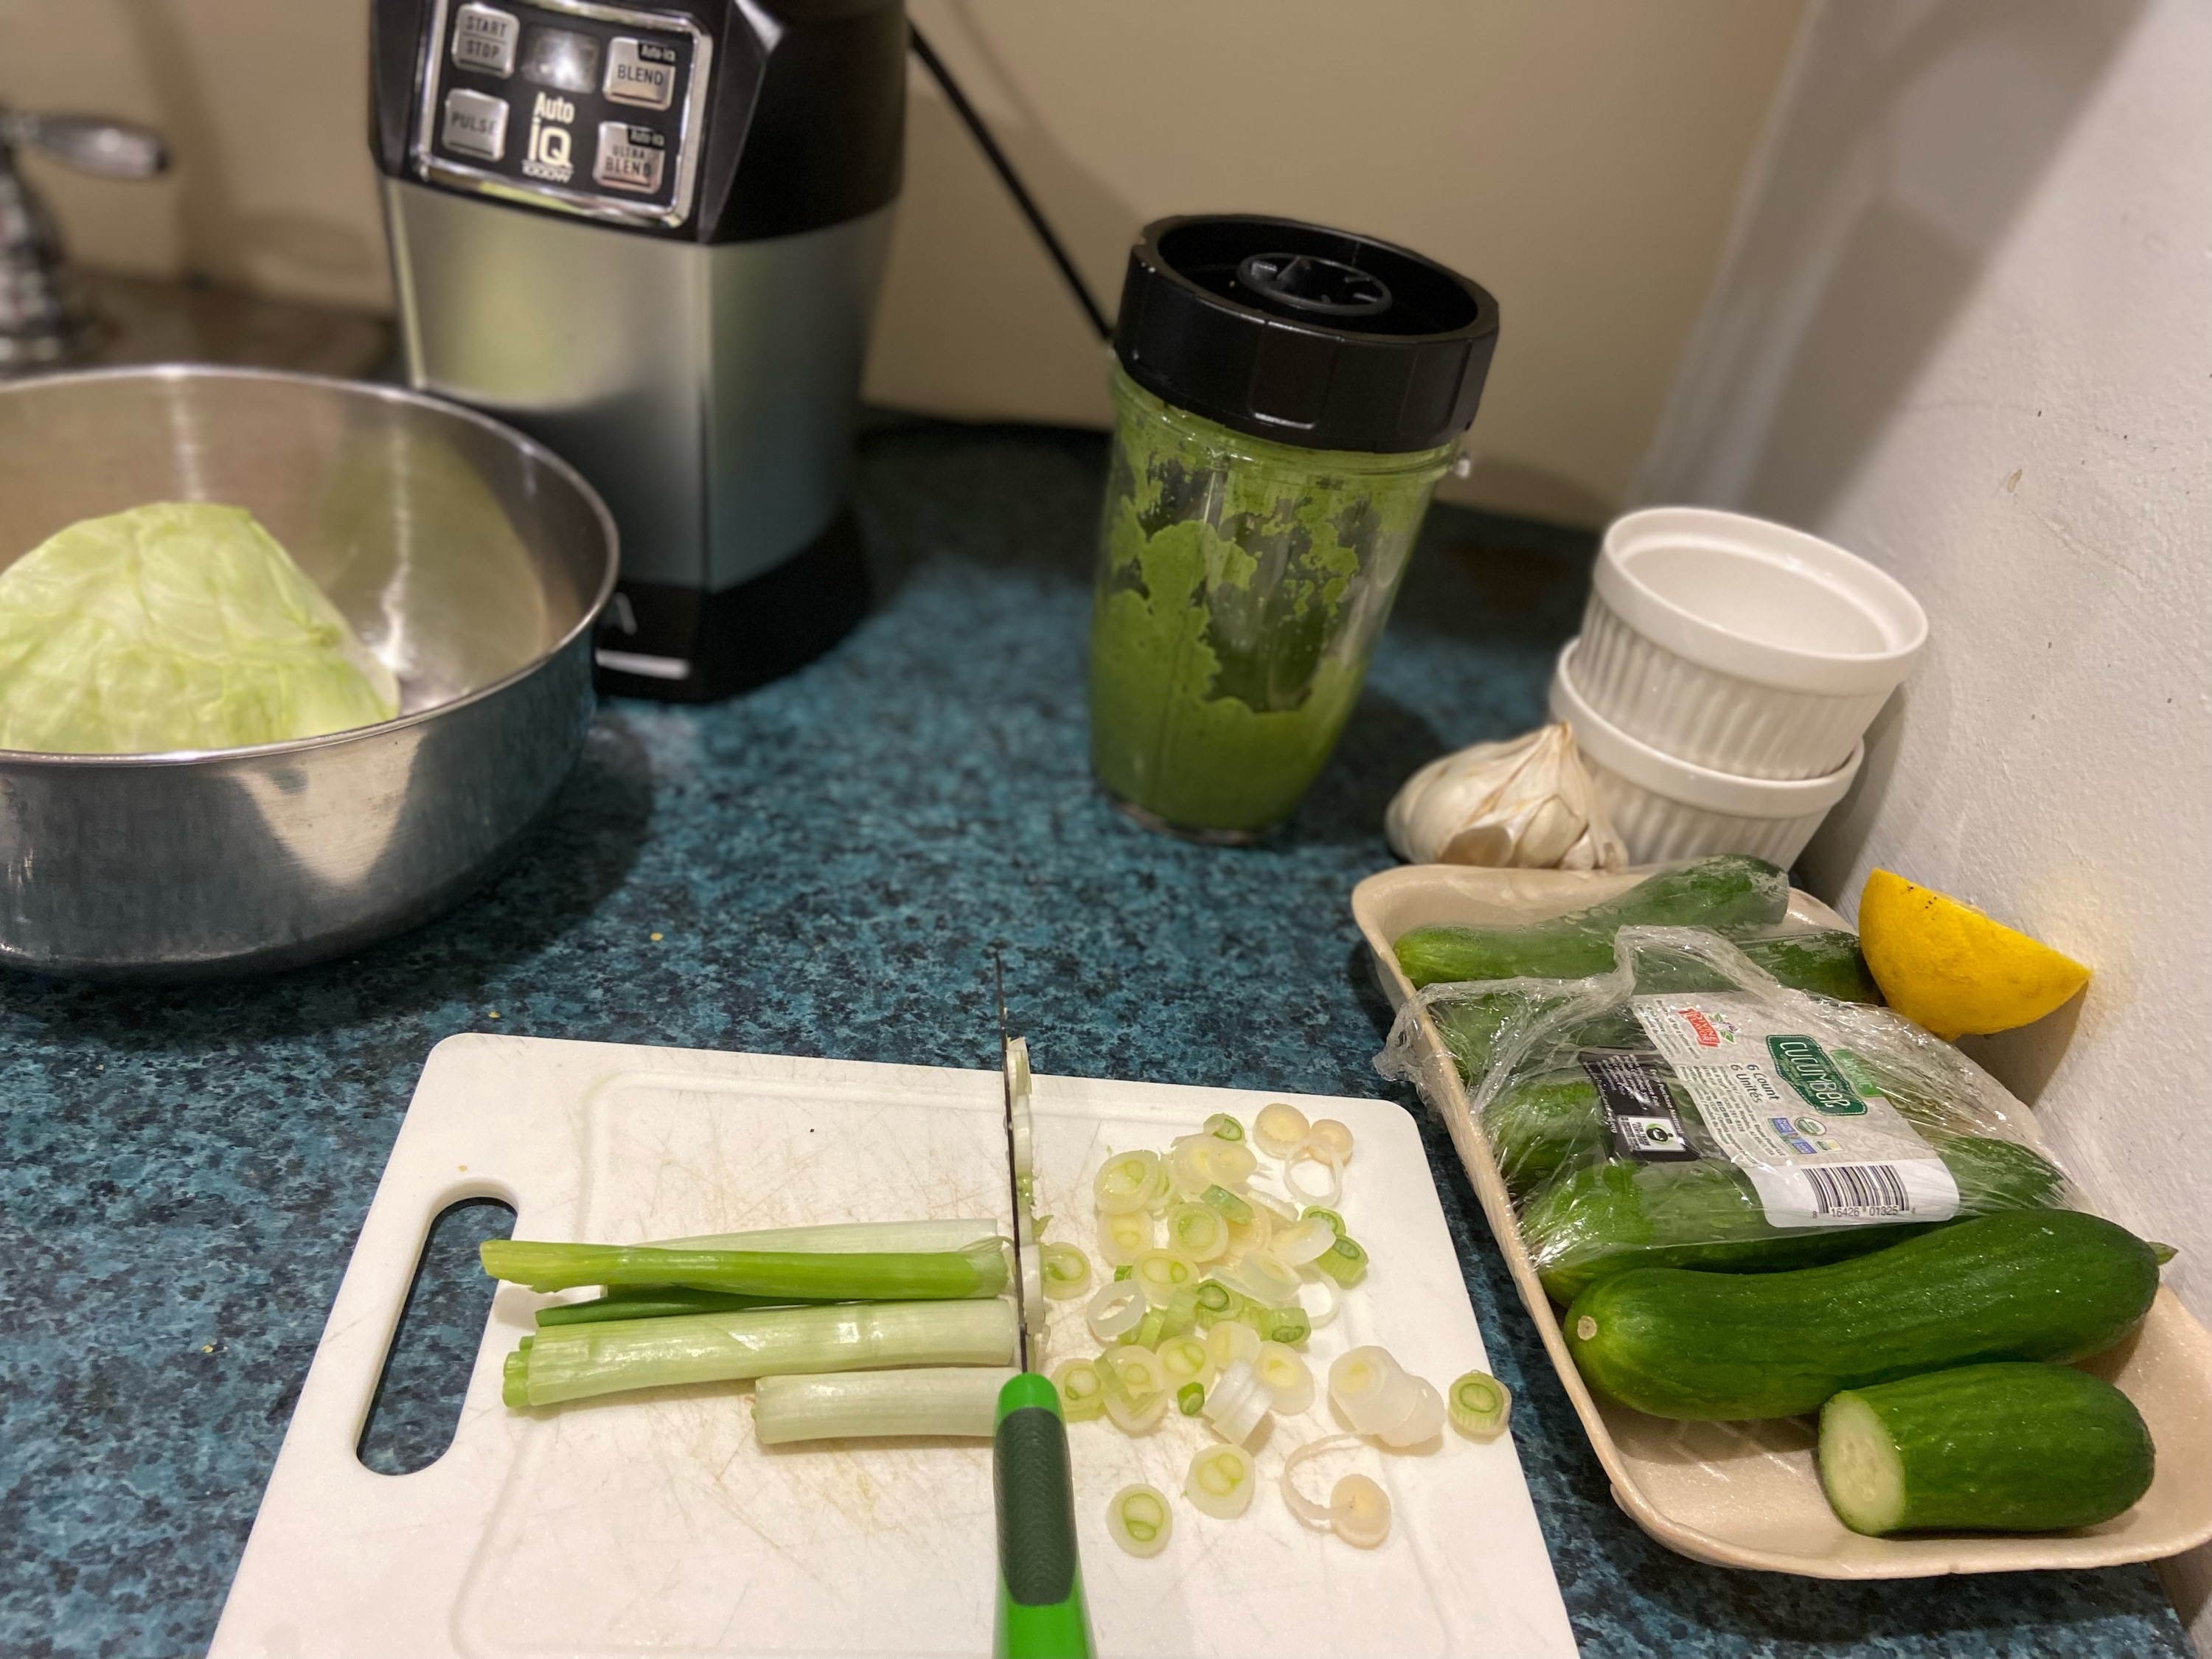 Chopped scallions on the cutting board